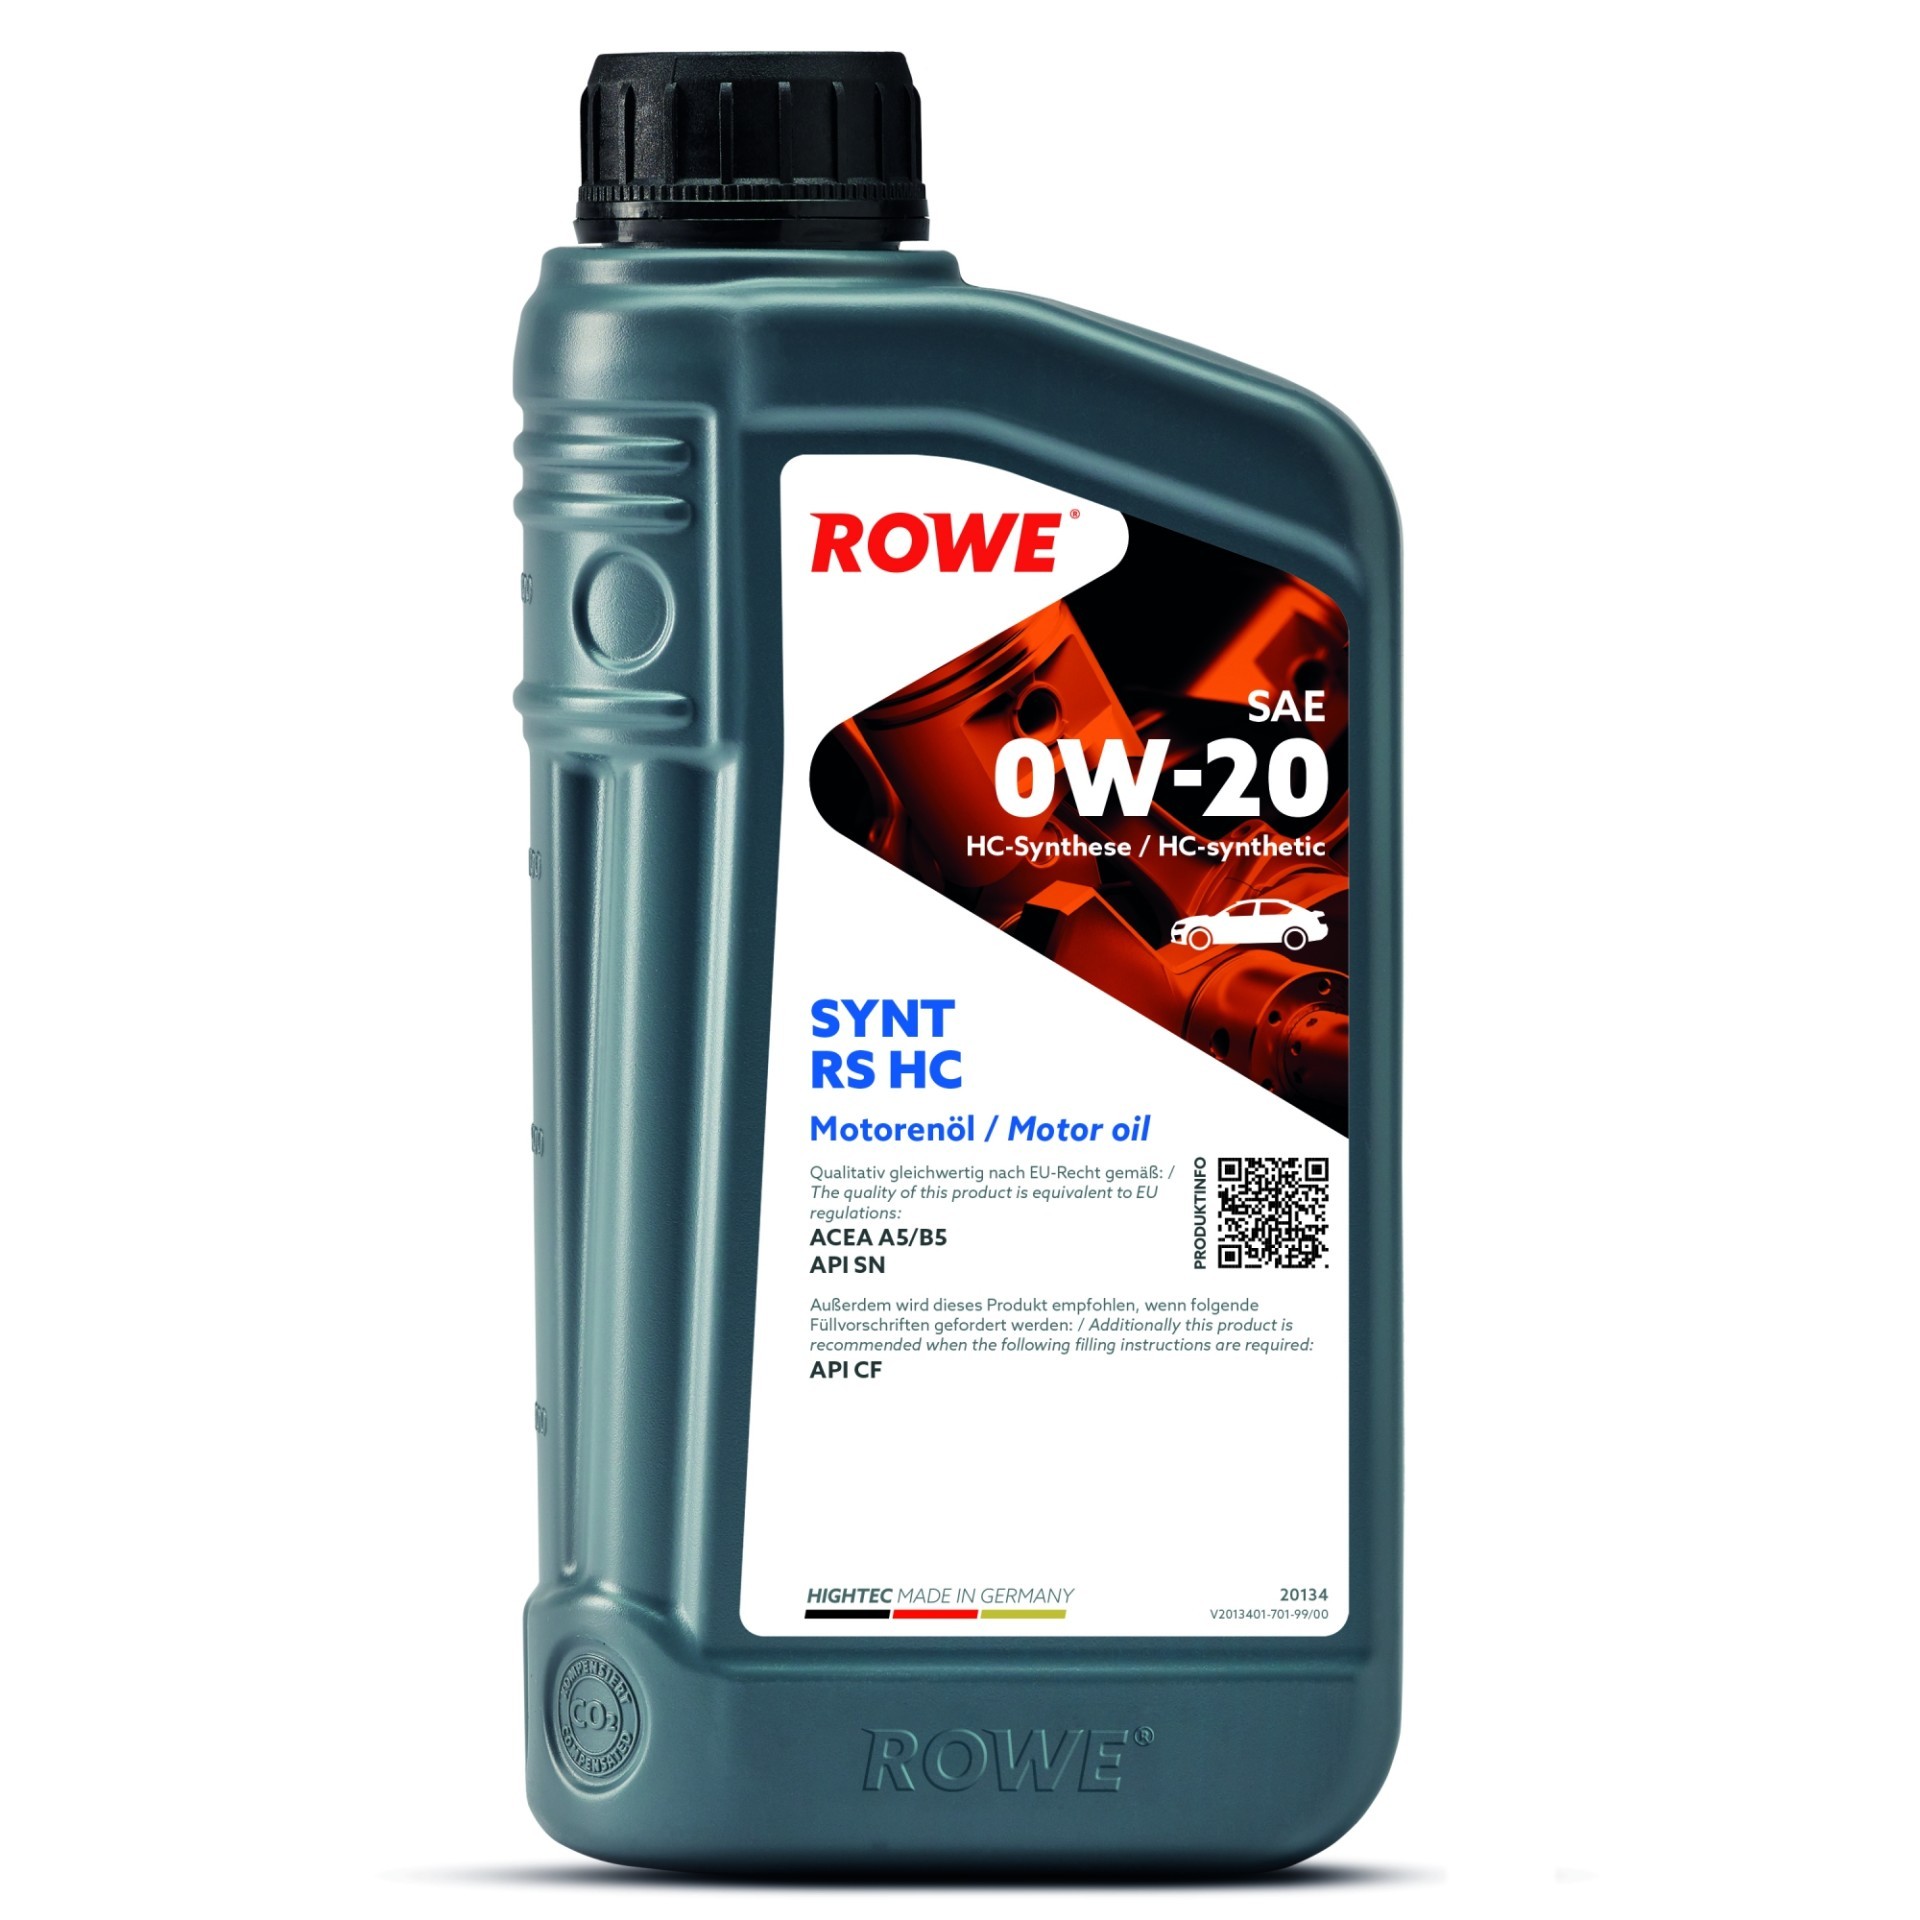 ROWE HIGHTEC SYNT RS HC SAE 0W-20 (20134) 1.0L